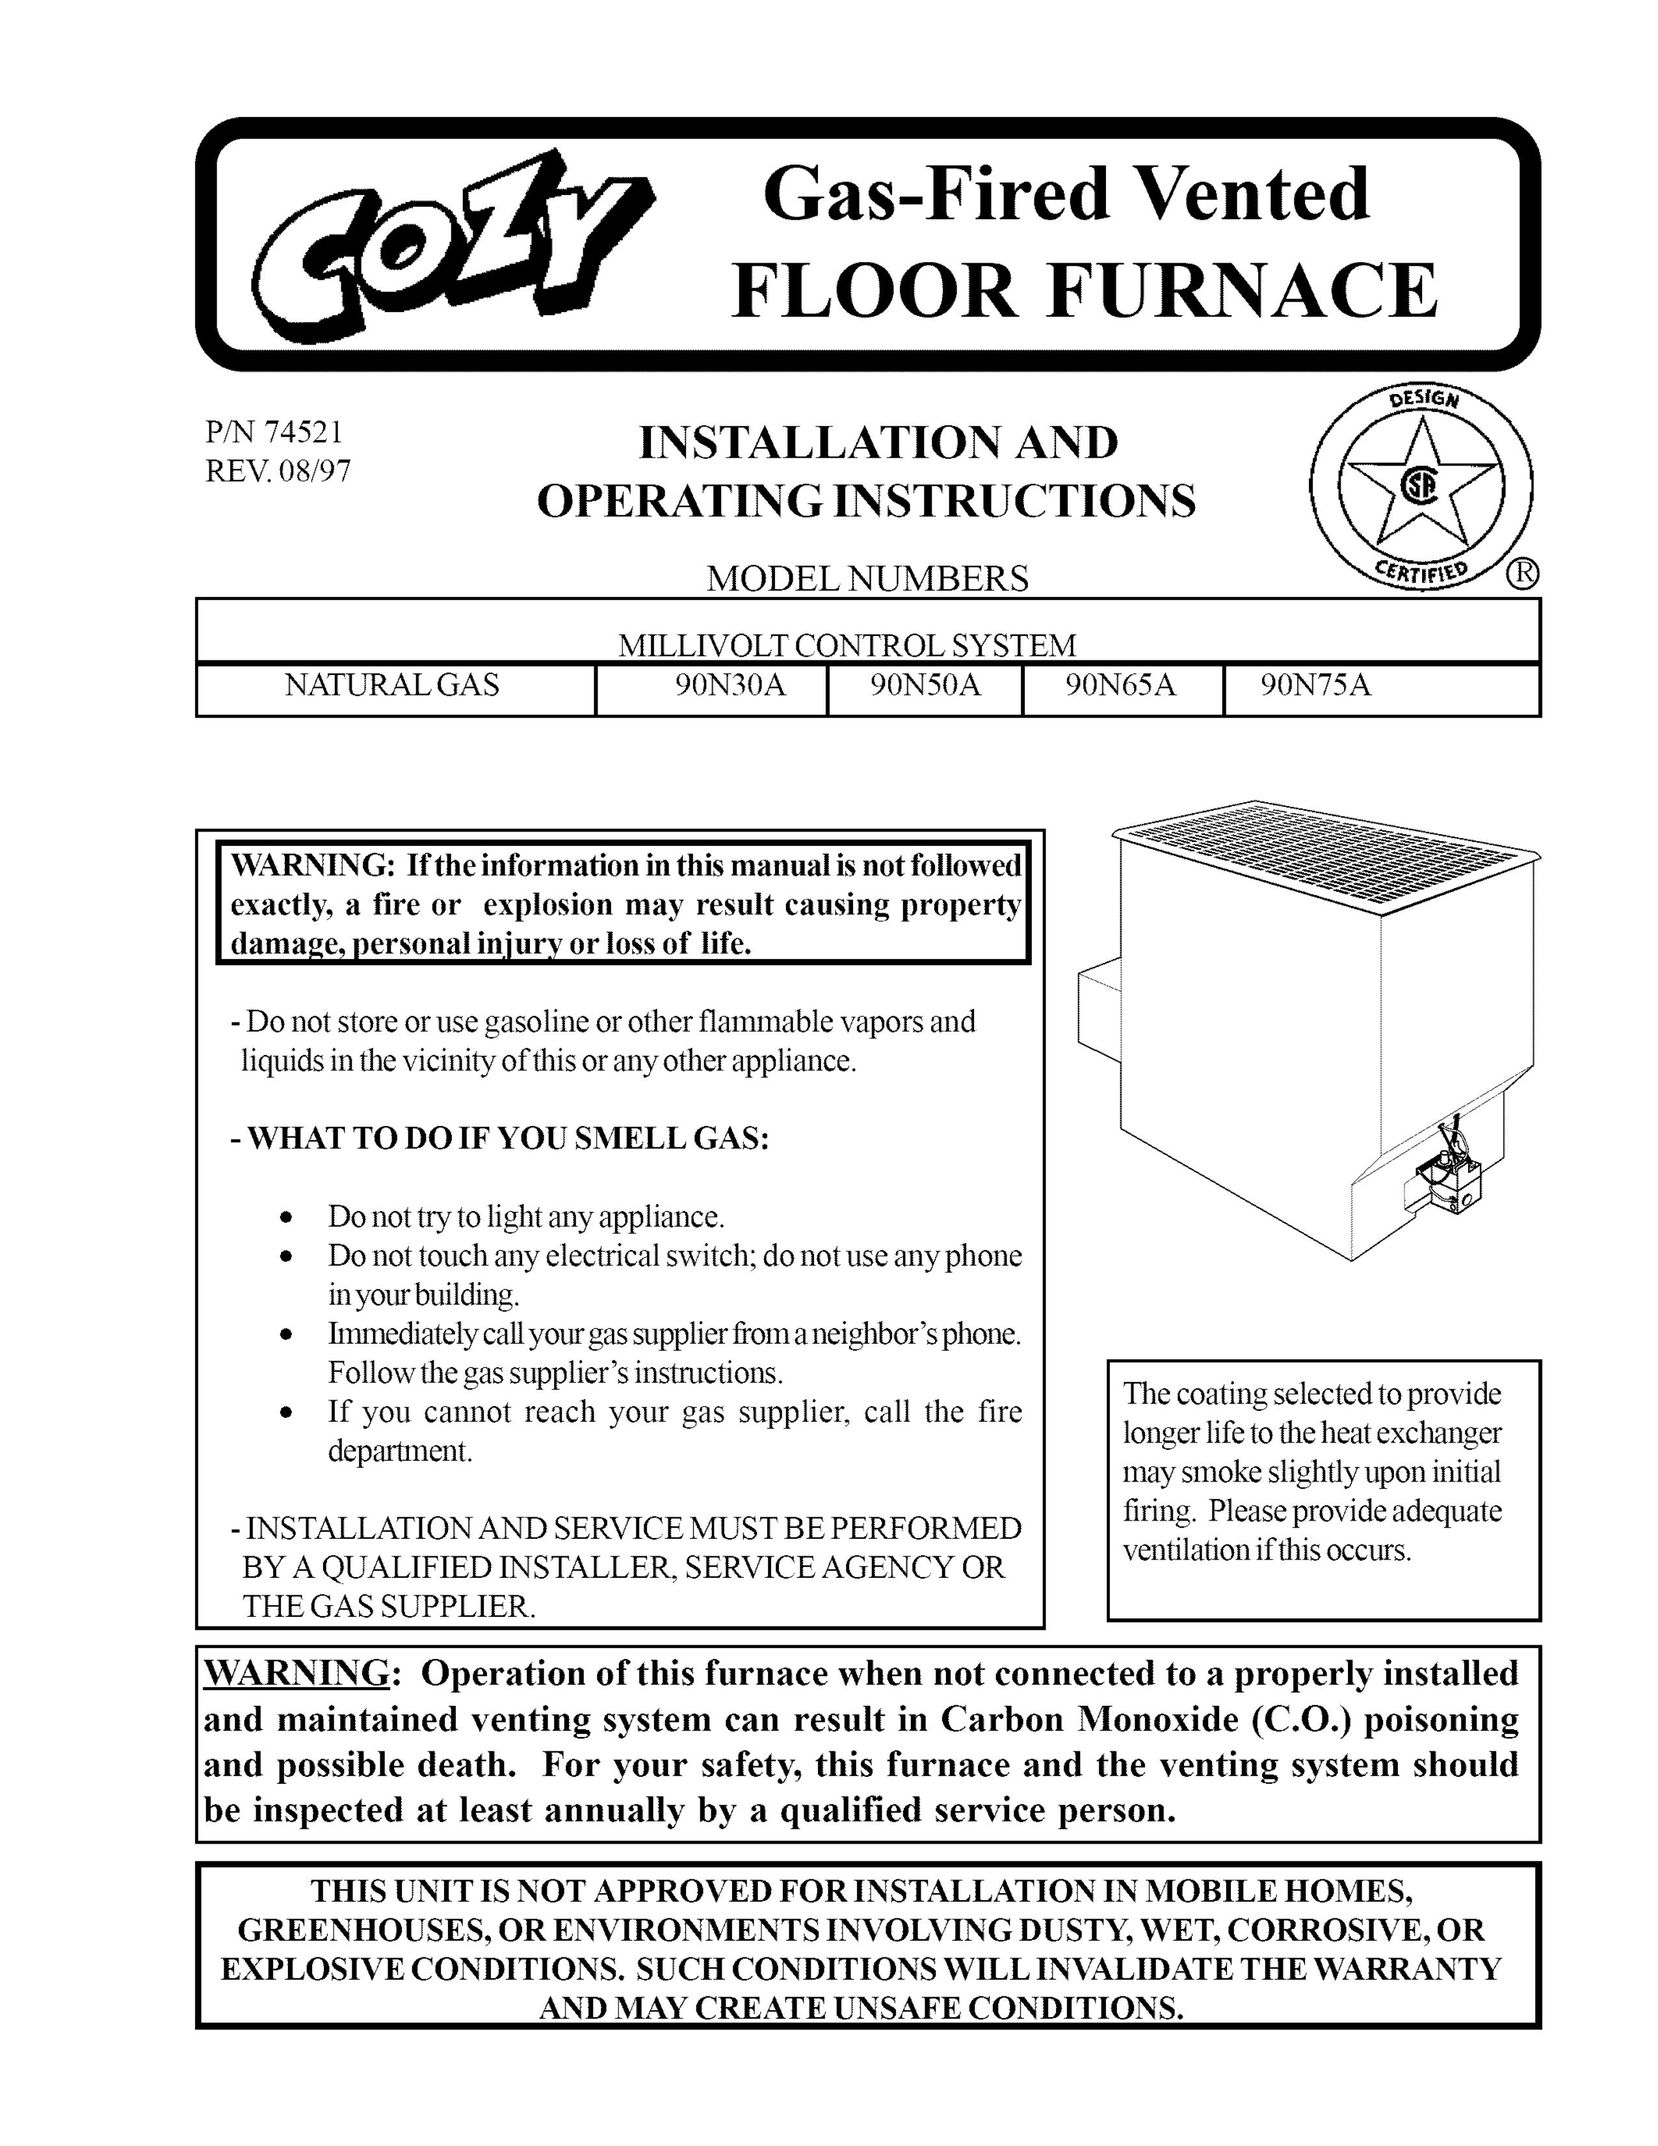 Louisville Tin and Stove 90N65A Furnace User Manual